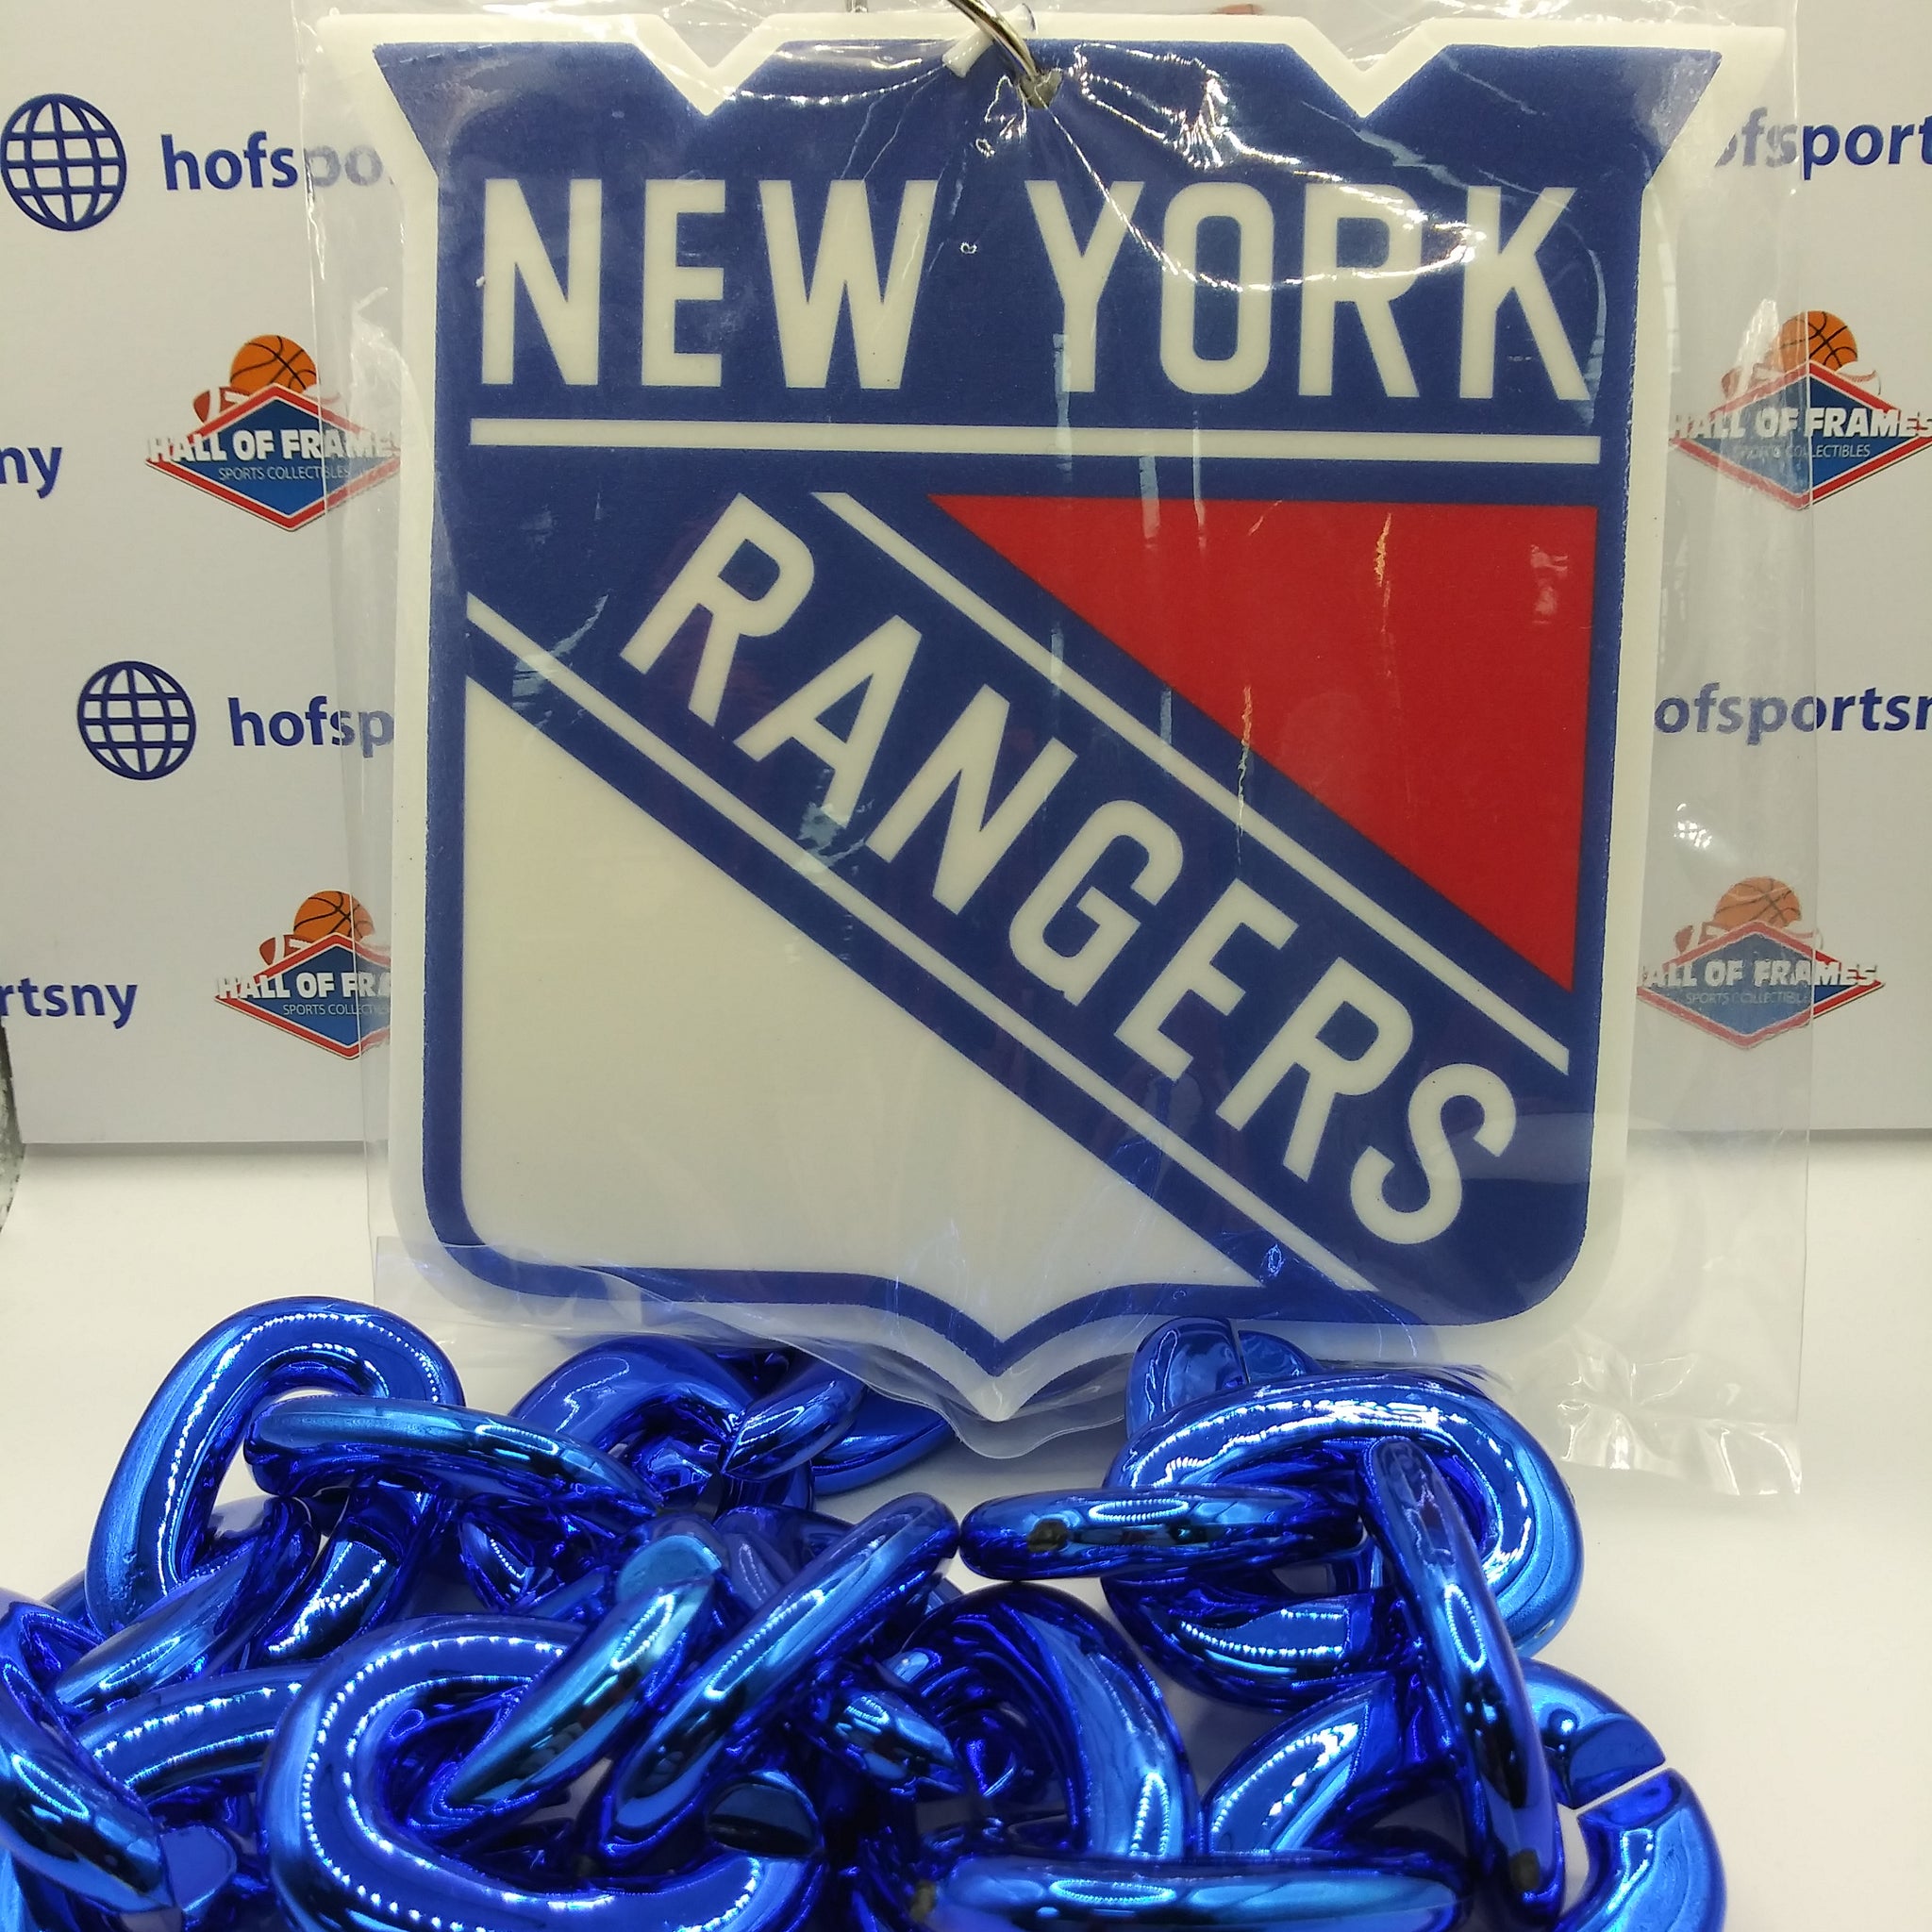 NEW YORK RANGERS FANCHAIN BY FANFAVE!